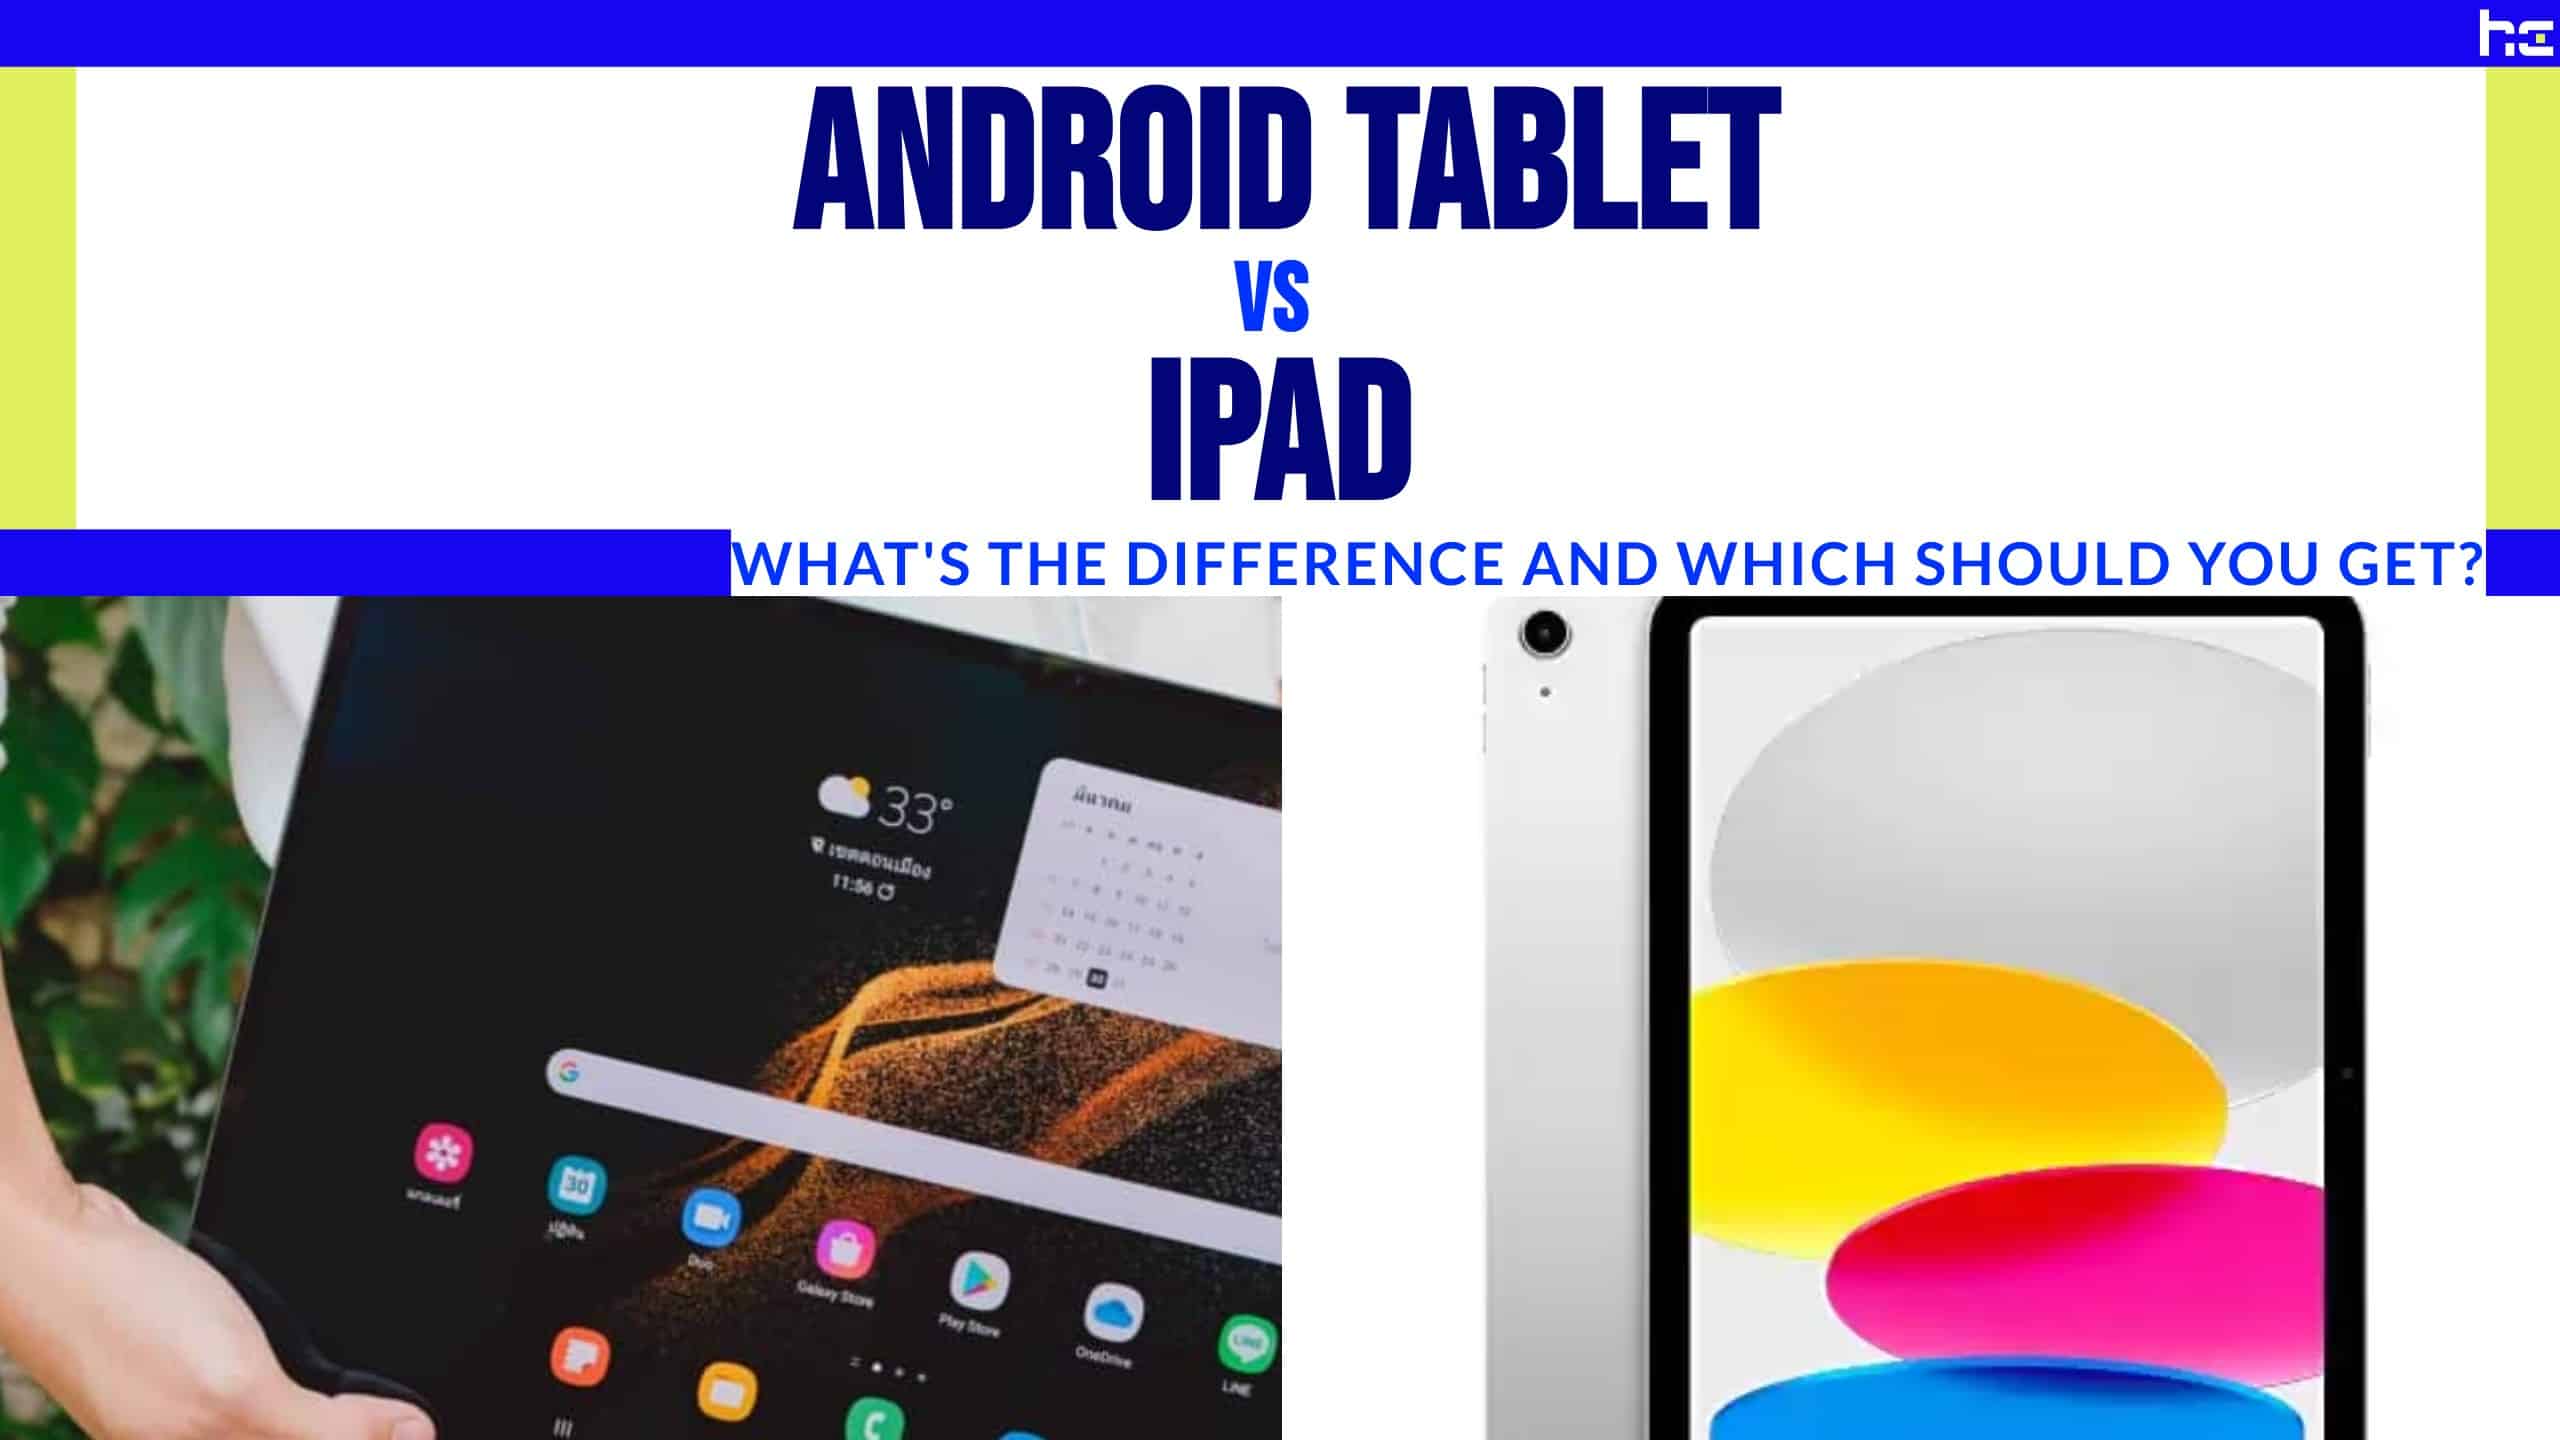 Android Tablet vs iPad featured image